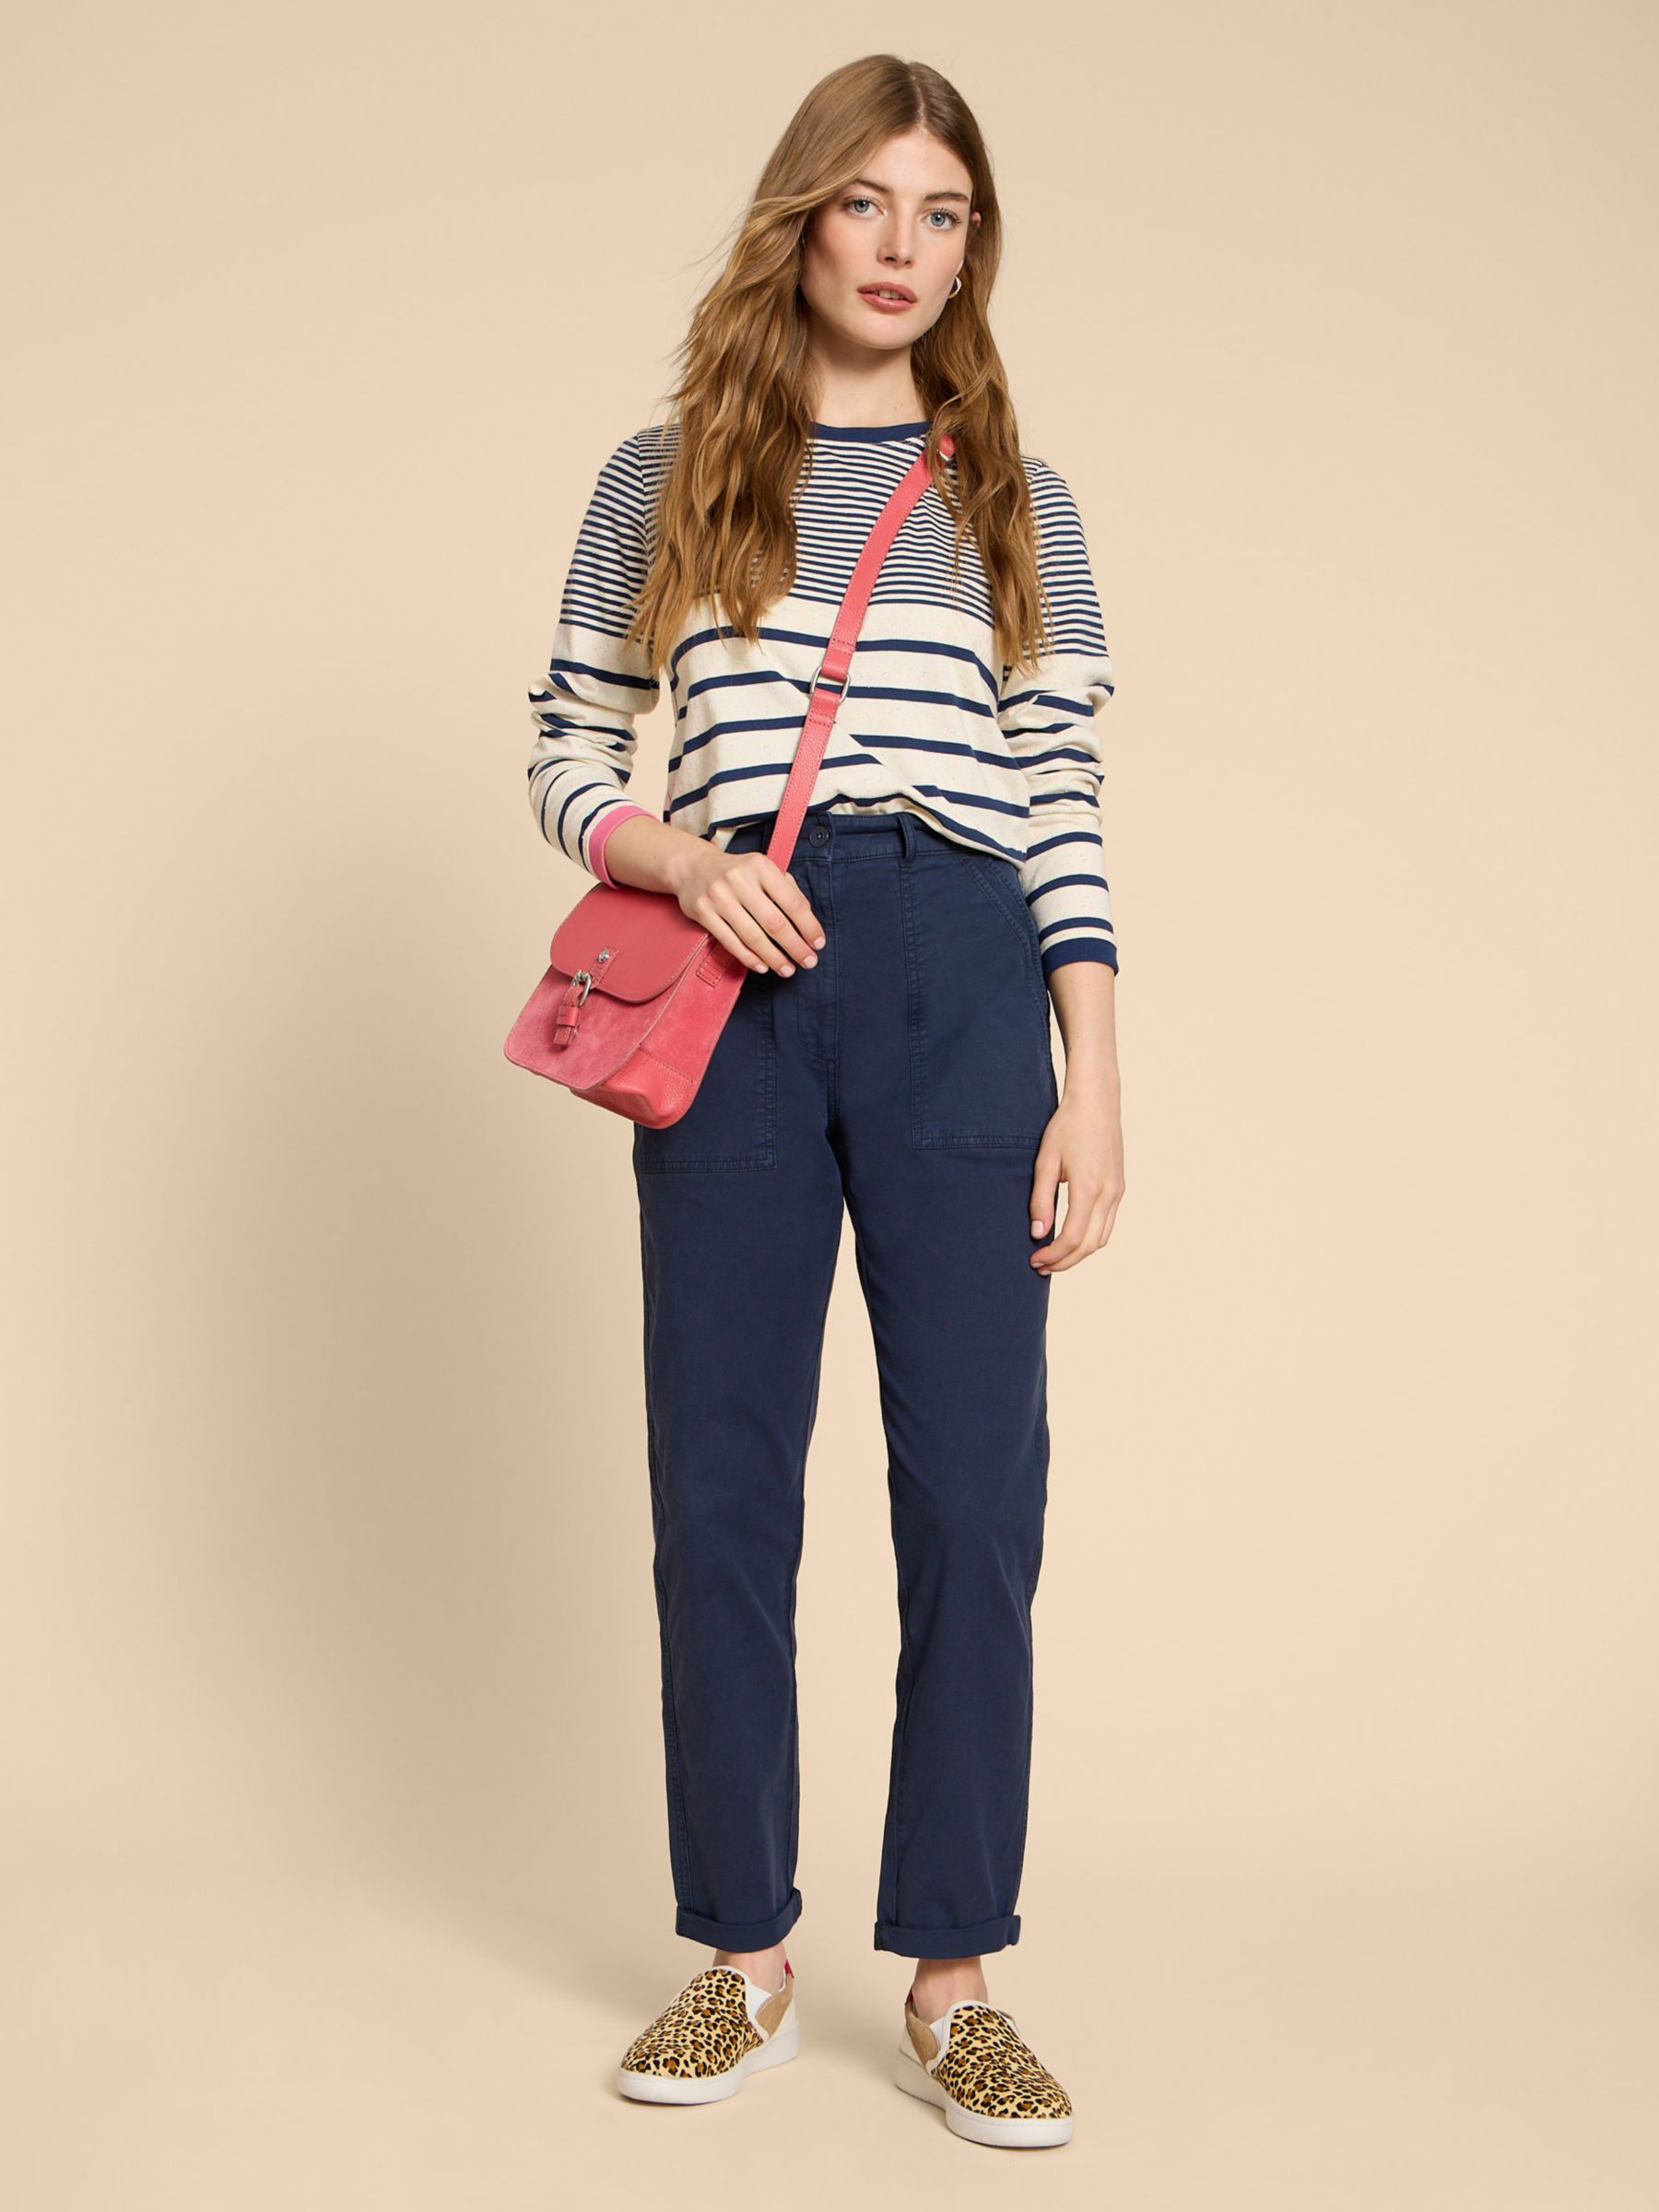 Buy White Stuff Petite Twister Chino Trousers Online at johnlewis.com